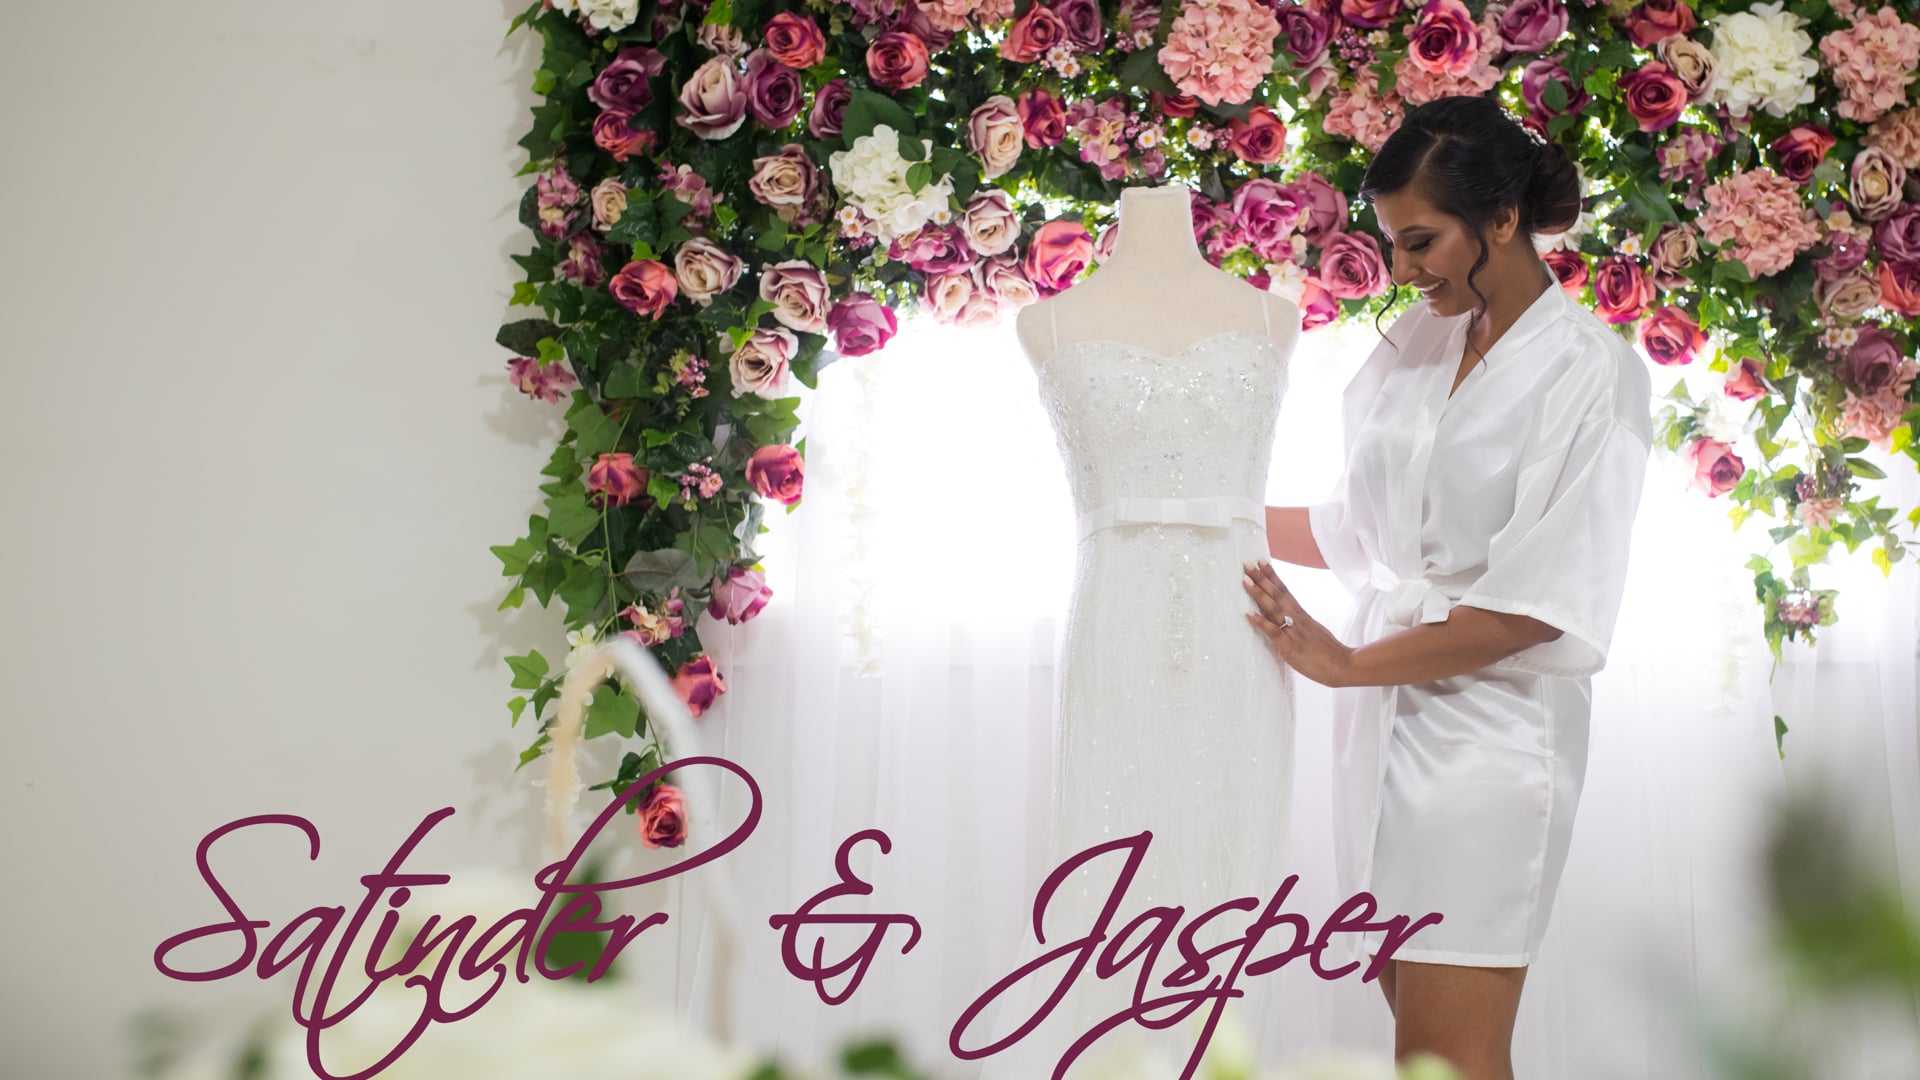 Satinder and Jasper | Highlight Video by X3 PRODUCTIONS